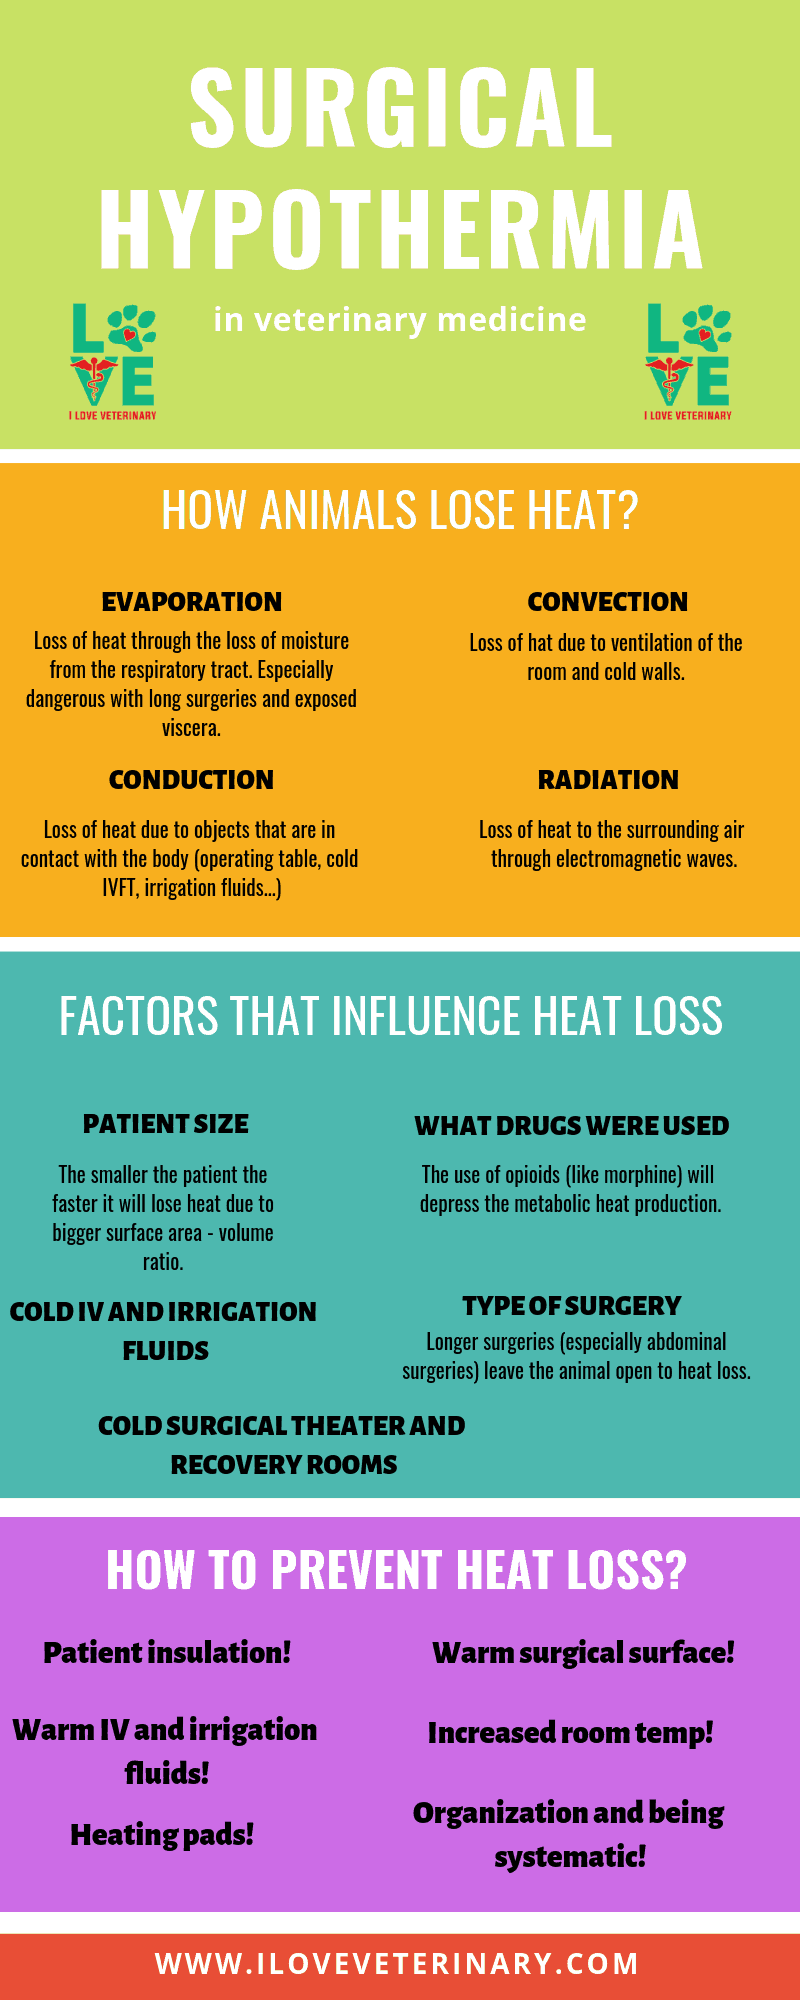 surgical hypothermia infographic